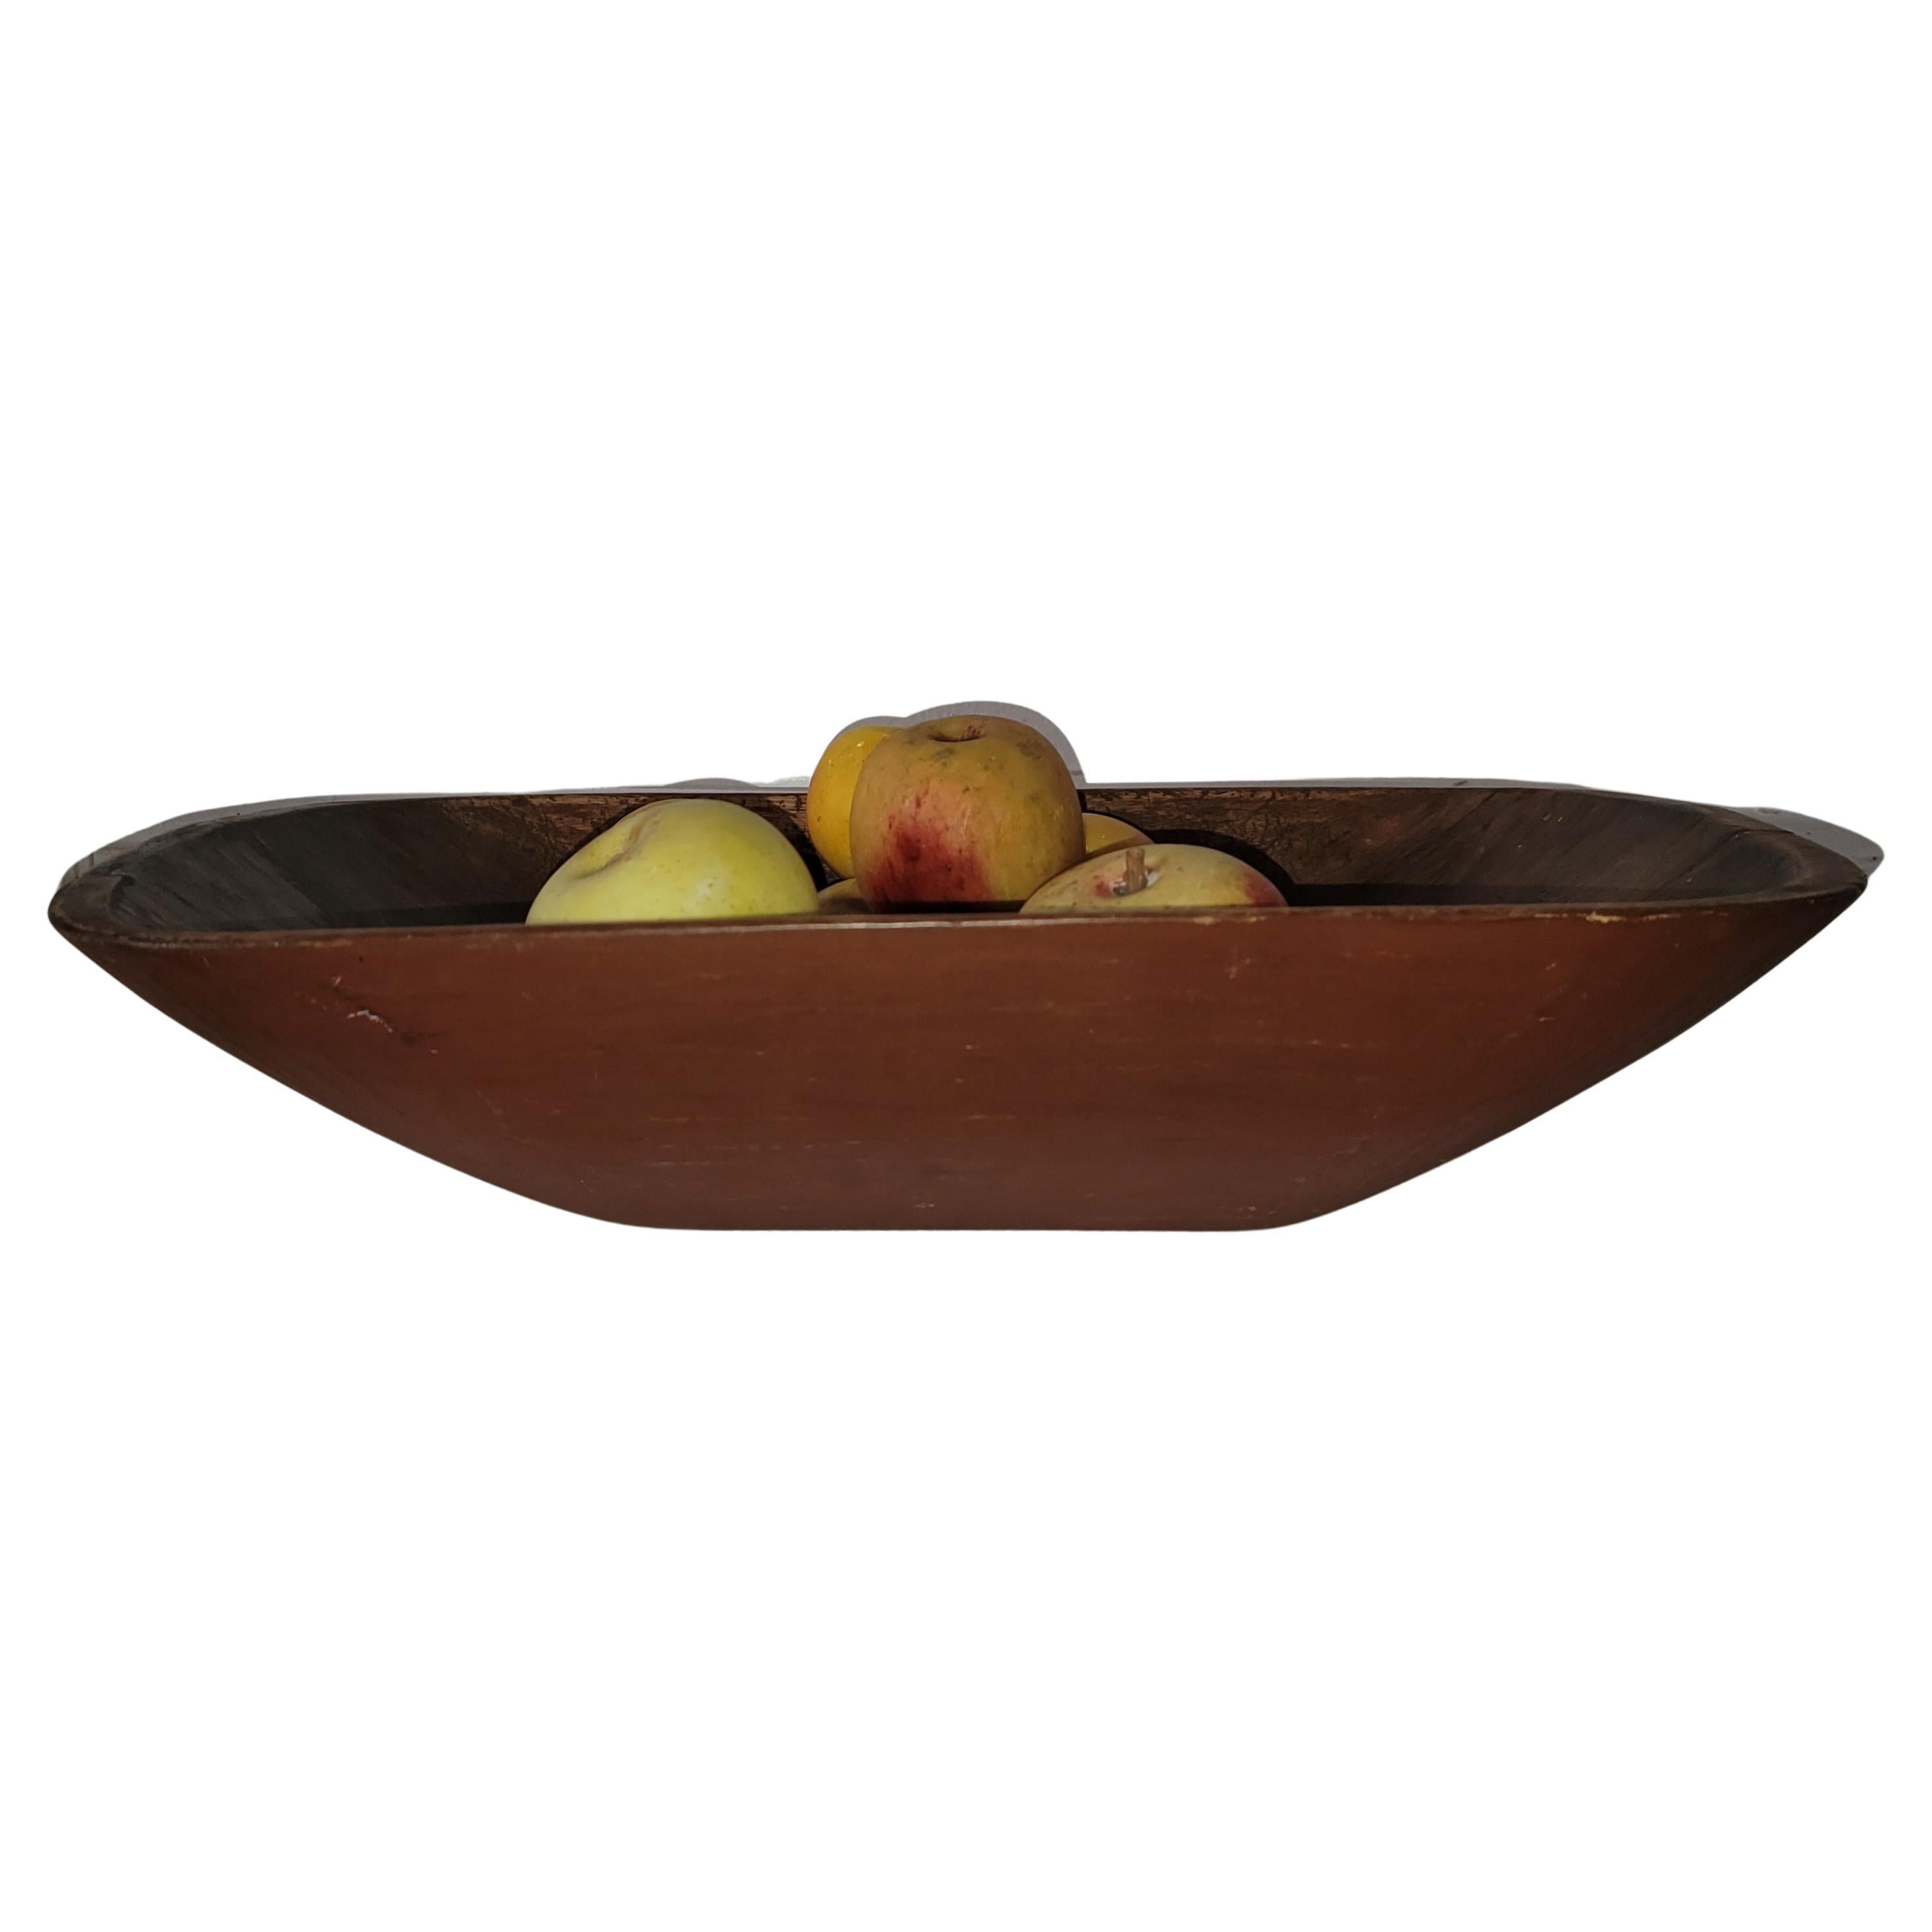 This fantastic original red painted trencher hand carved bowl from New England in fine condition with a collection of ten pieces of stone fruit (apples). This collection is one package deal.

10 apples Apples vary in Size.
1 original red painted